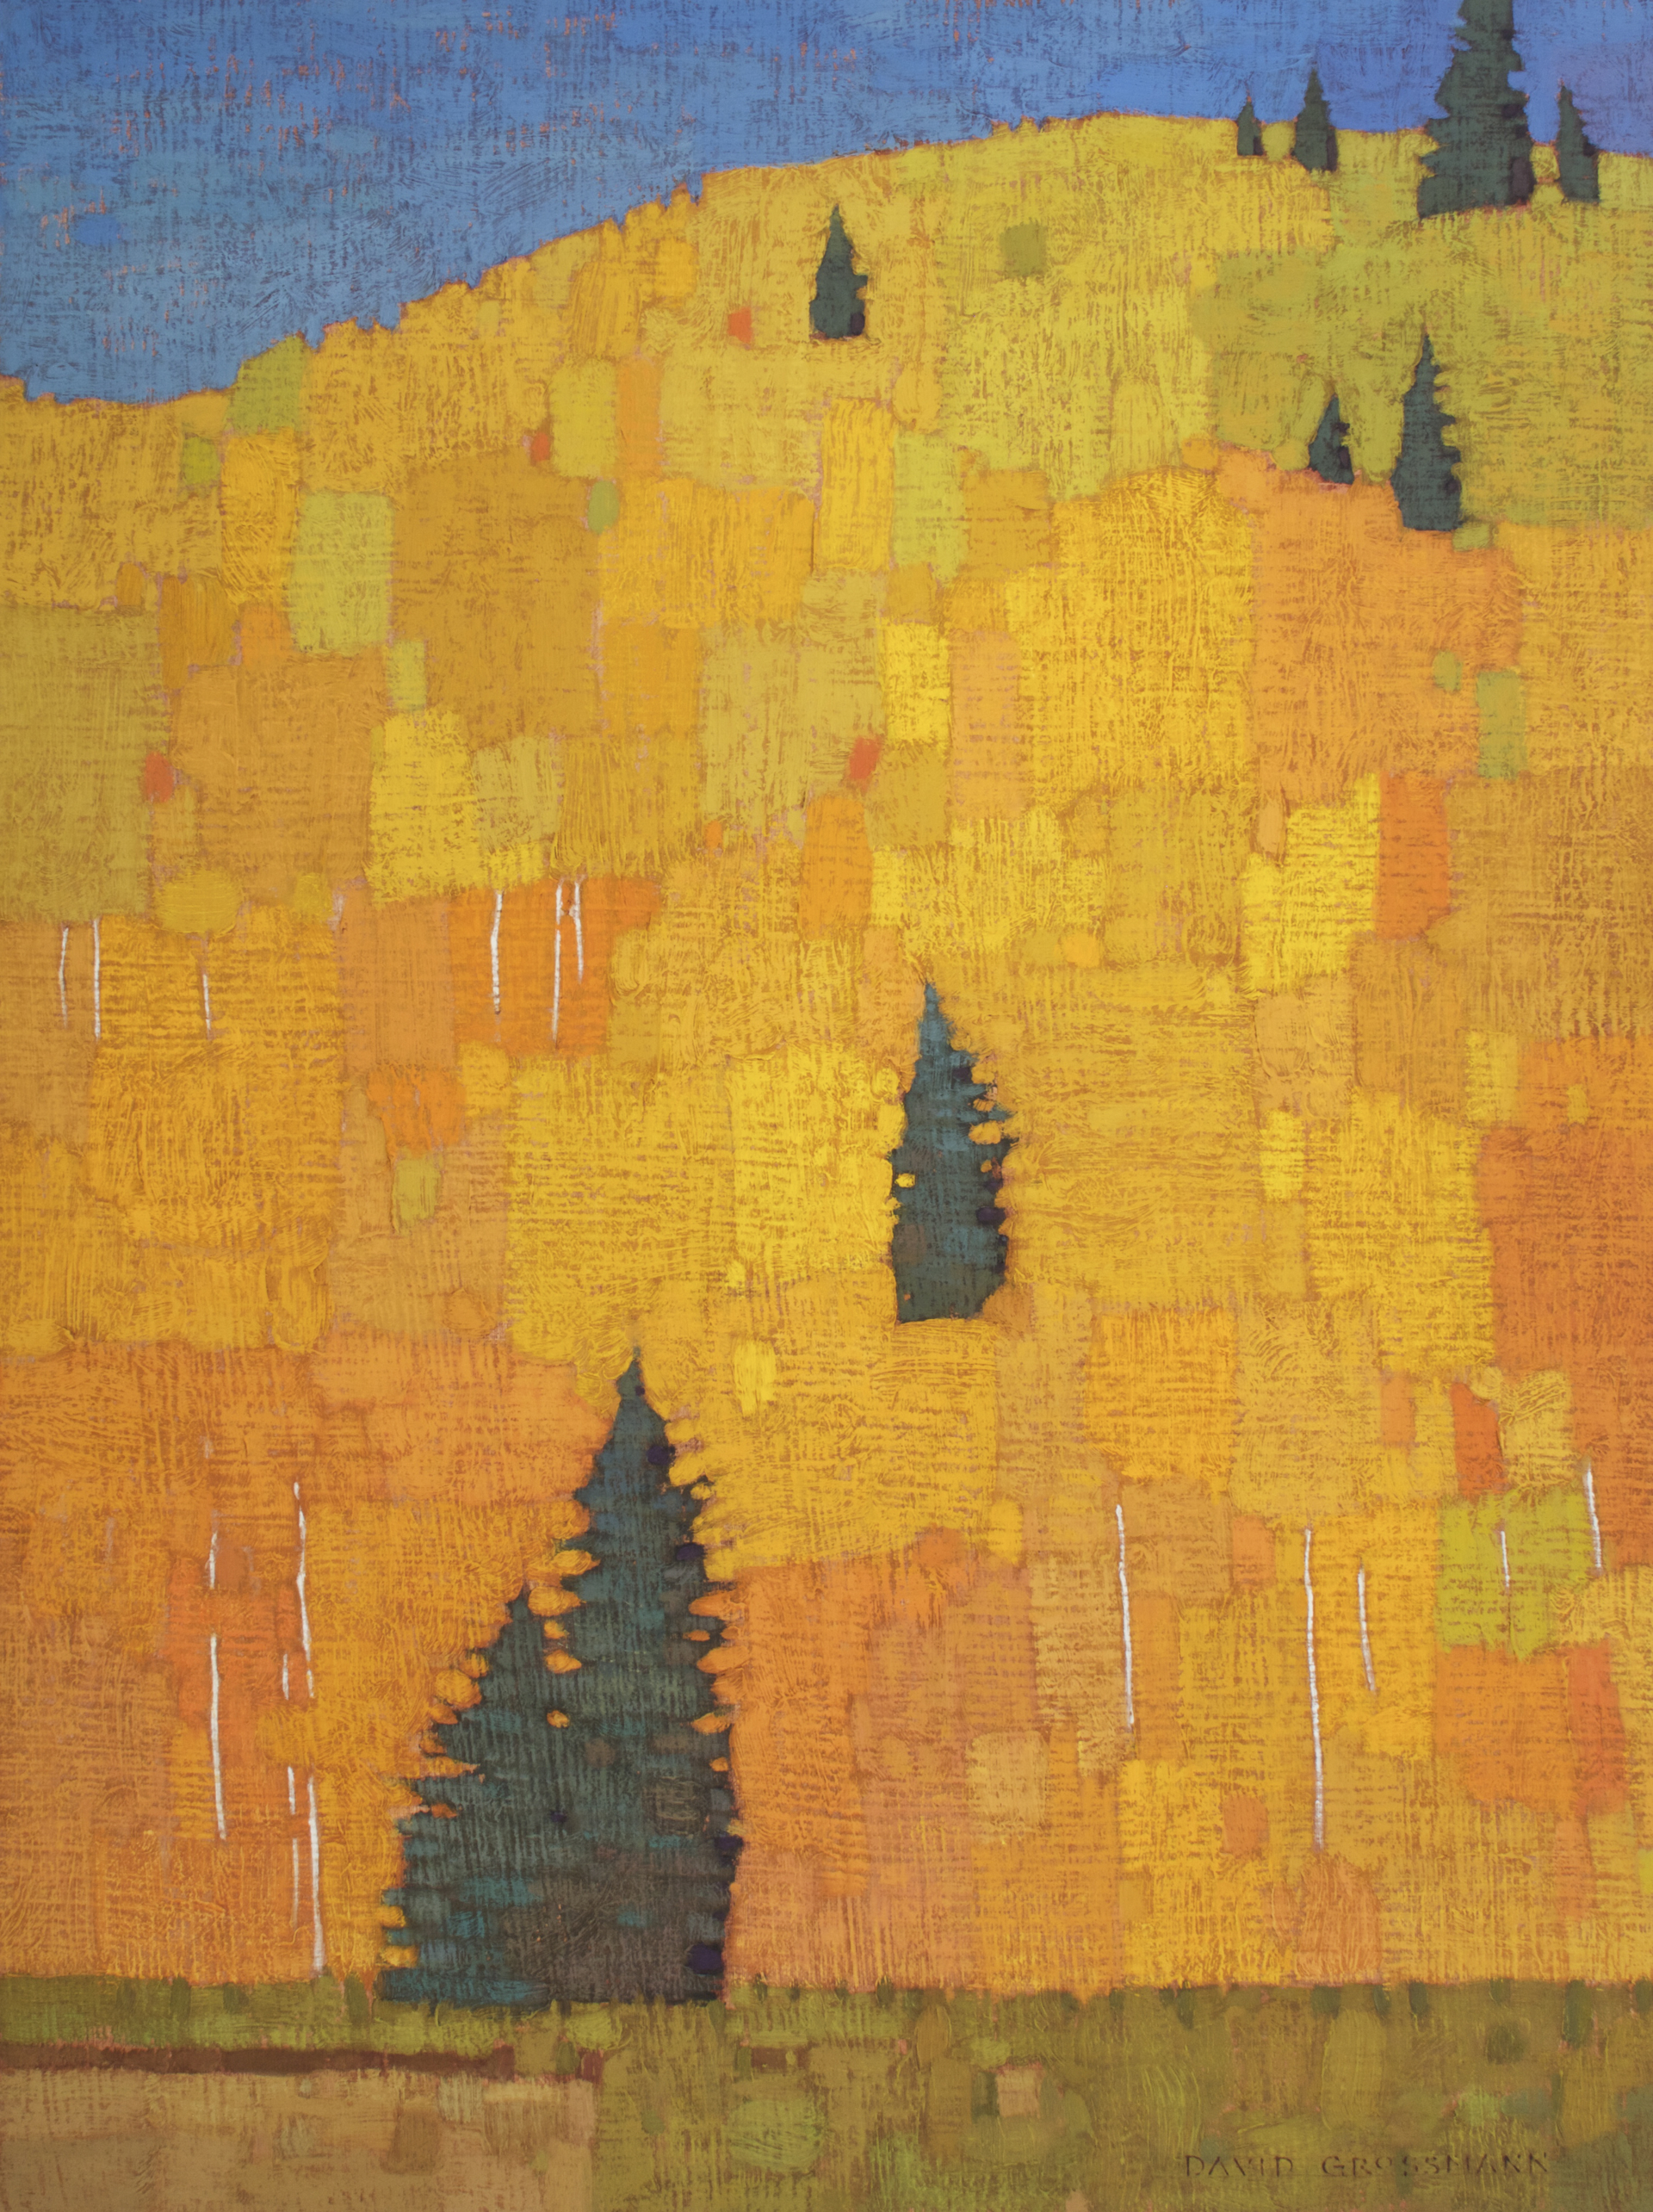 Scattered Pines and Aspen Patchwork  by David Grossmann